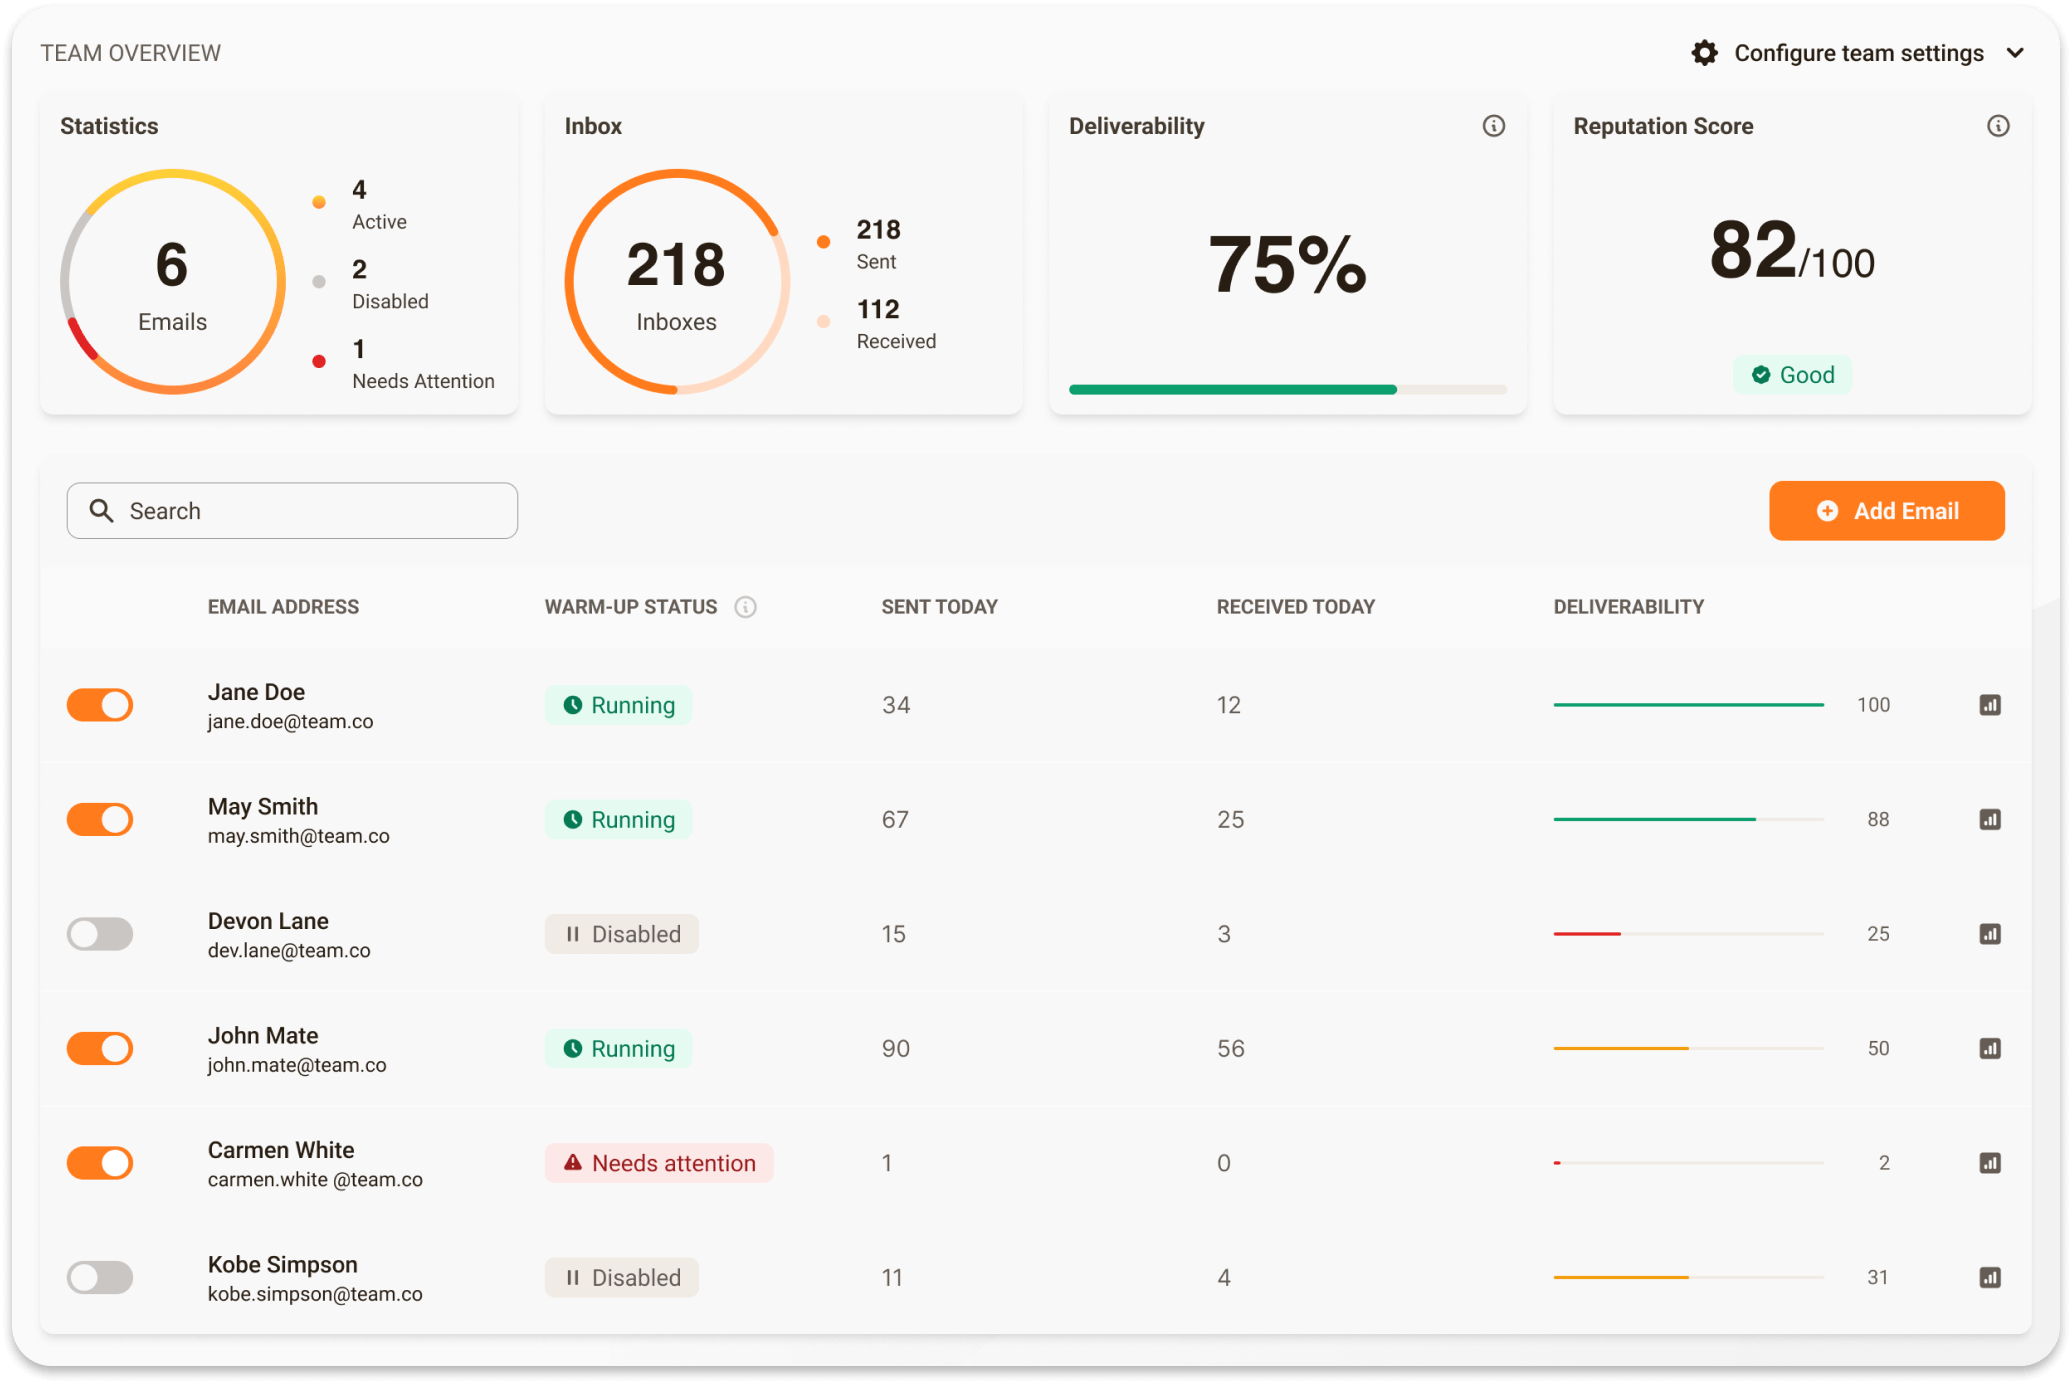 ToastMail Email Warming Dashboard